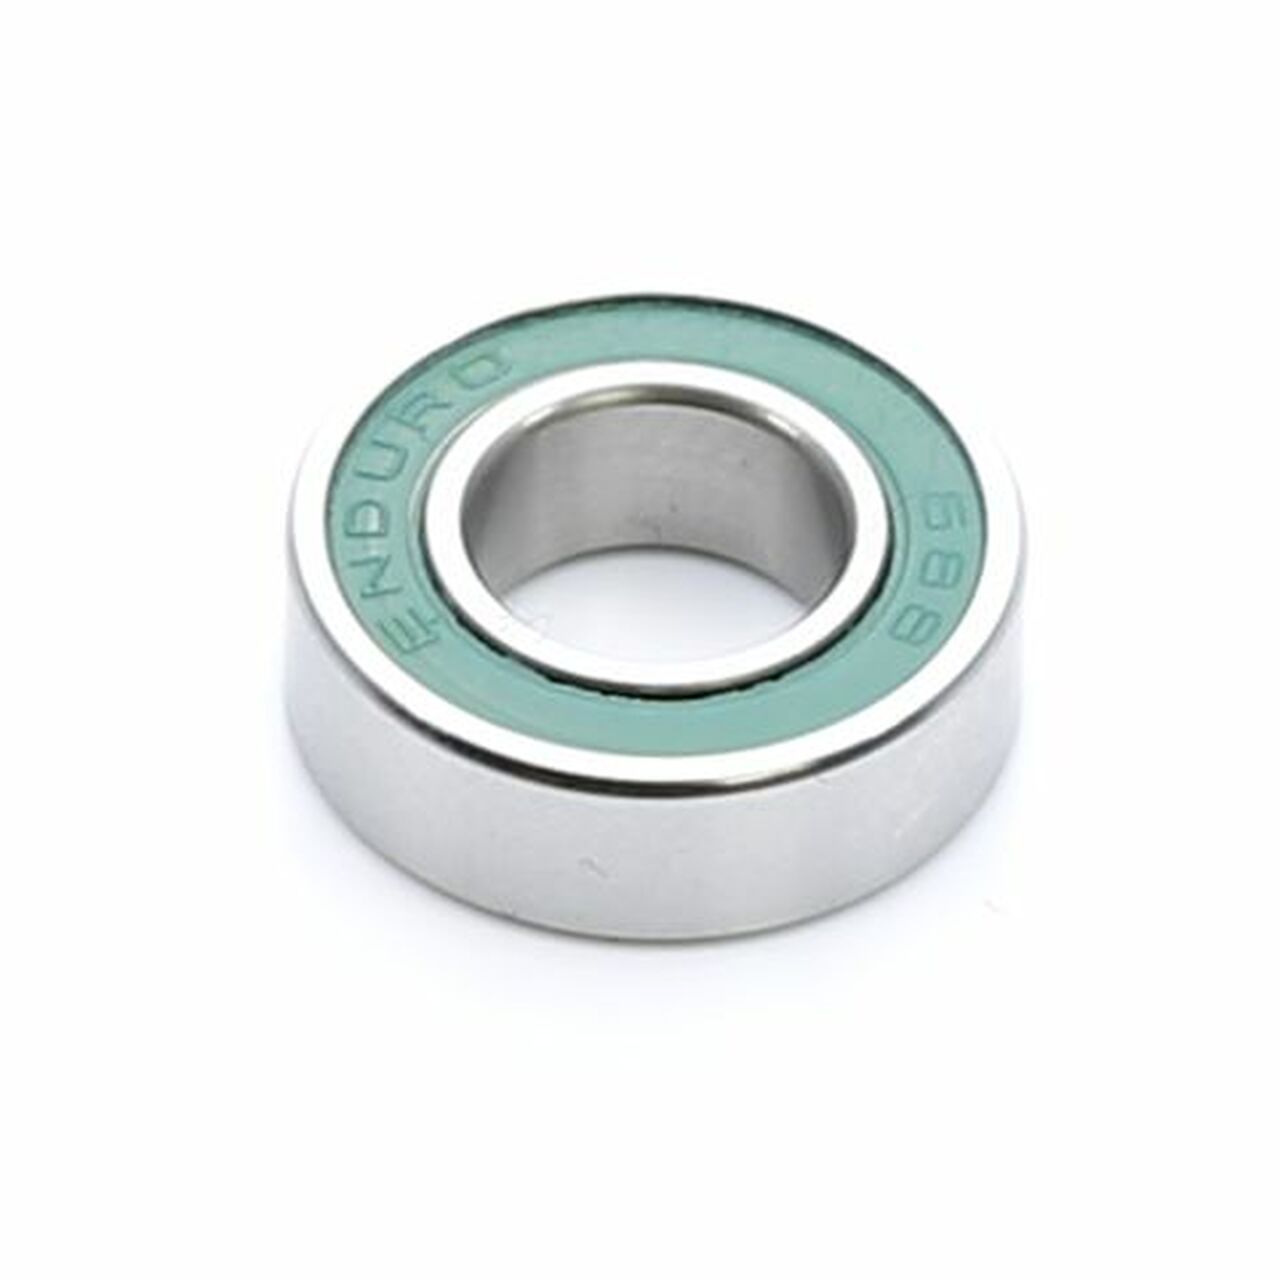 Enduro S688 LLB - Stainless Steel, Radial Bearing (C3 Clearance) - 8mm x 16mm x 5mm